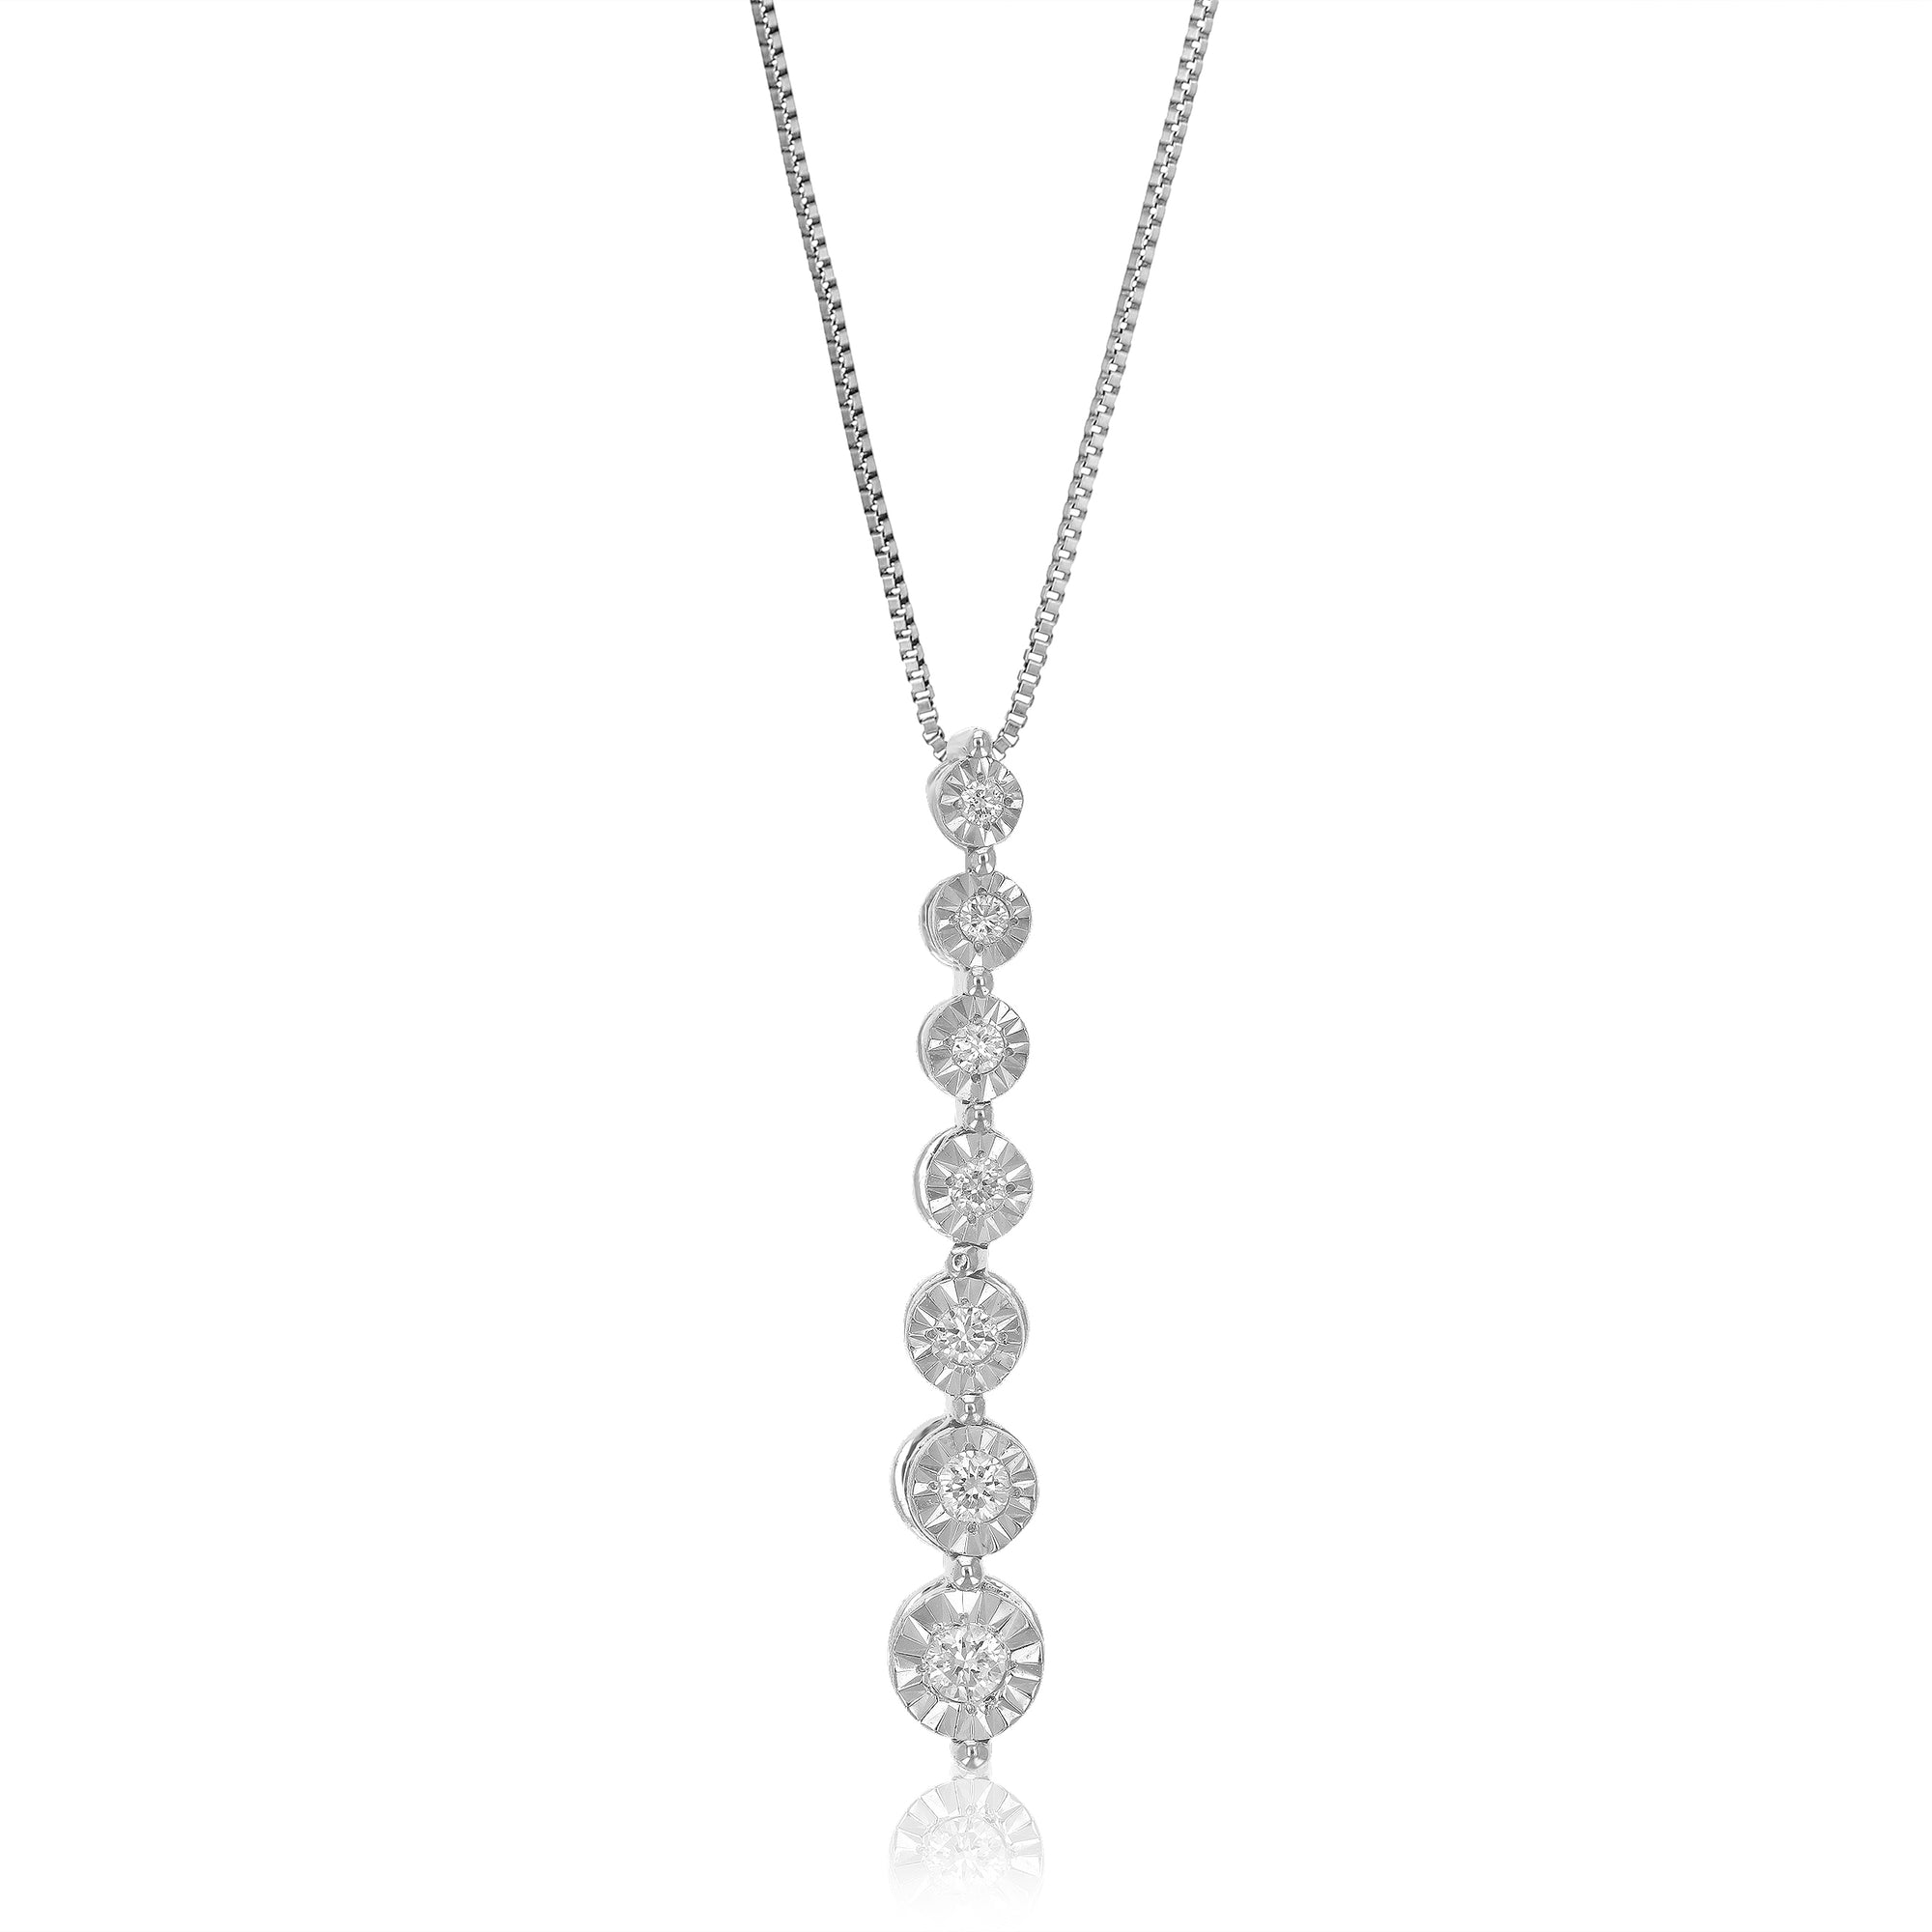 1/10 cttw Diamond Pendant Necklace for Women, Lab Grown Diamond Drop Pendant Necklace in .925 Sterling Silver with Chain, Size 1 Inch